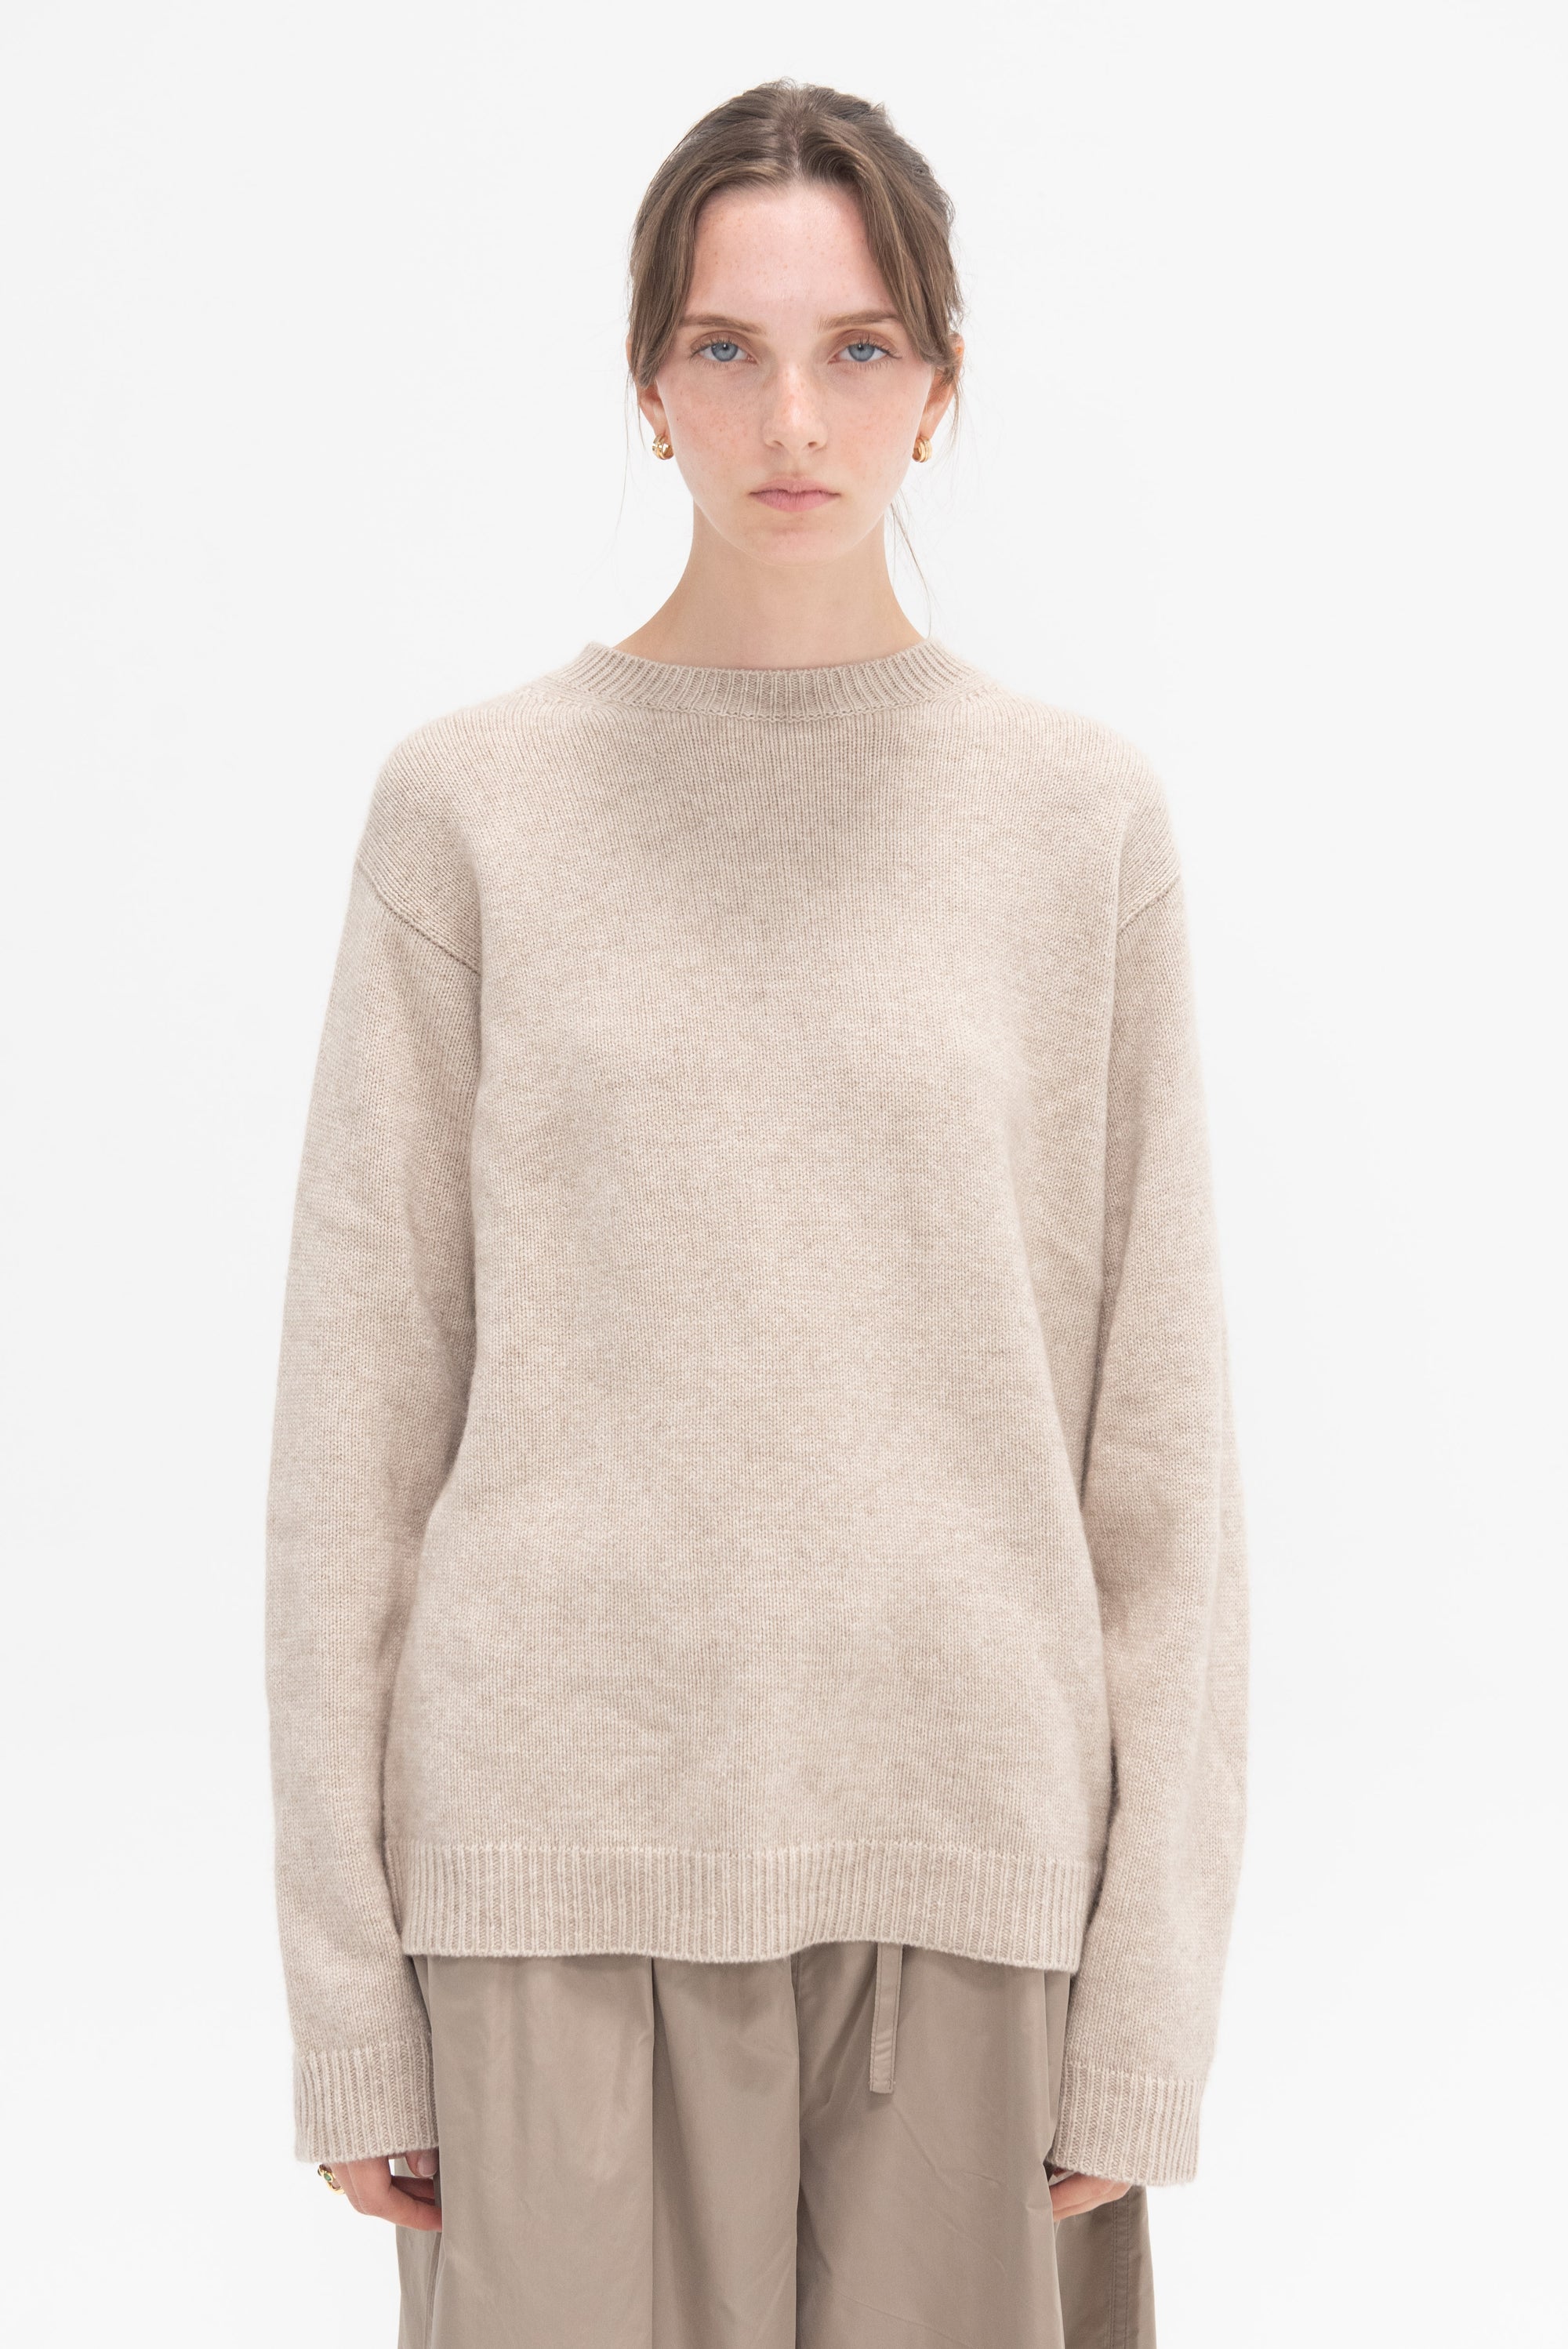 SOFIE D'HOORE - Moody Cashmere Sweater, Oatmeal